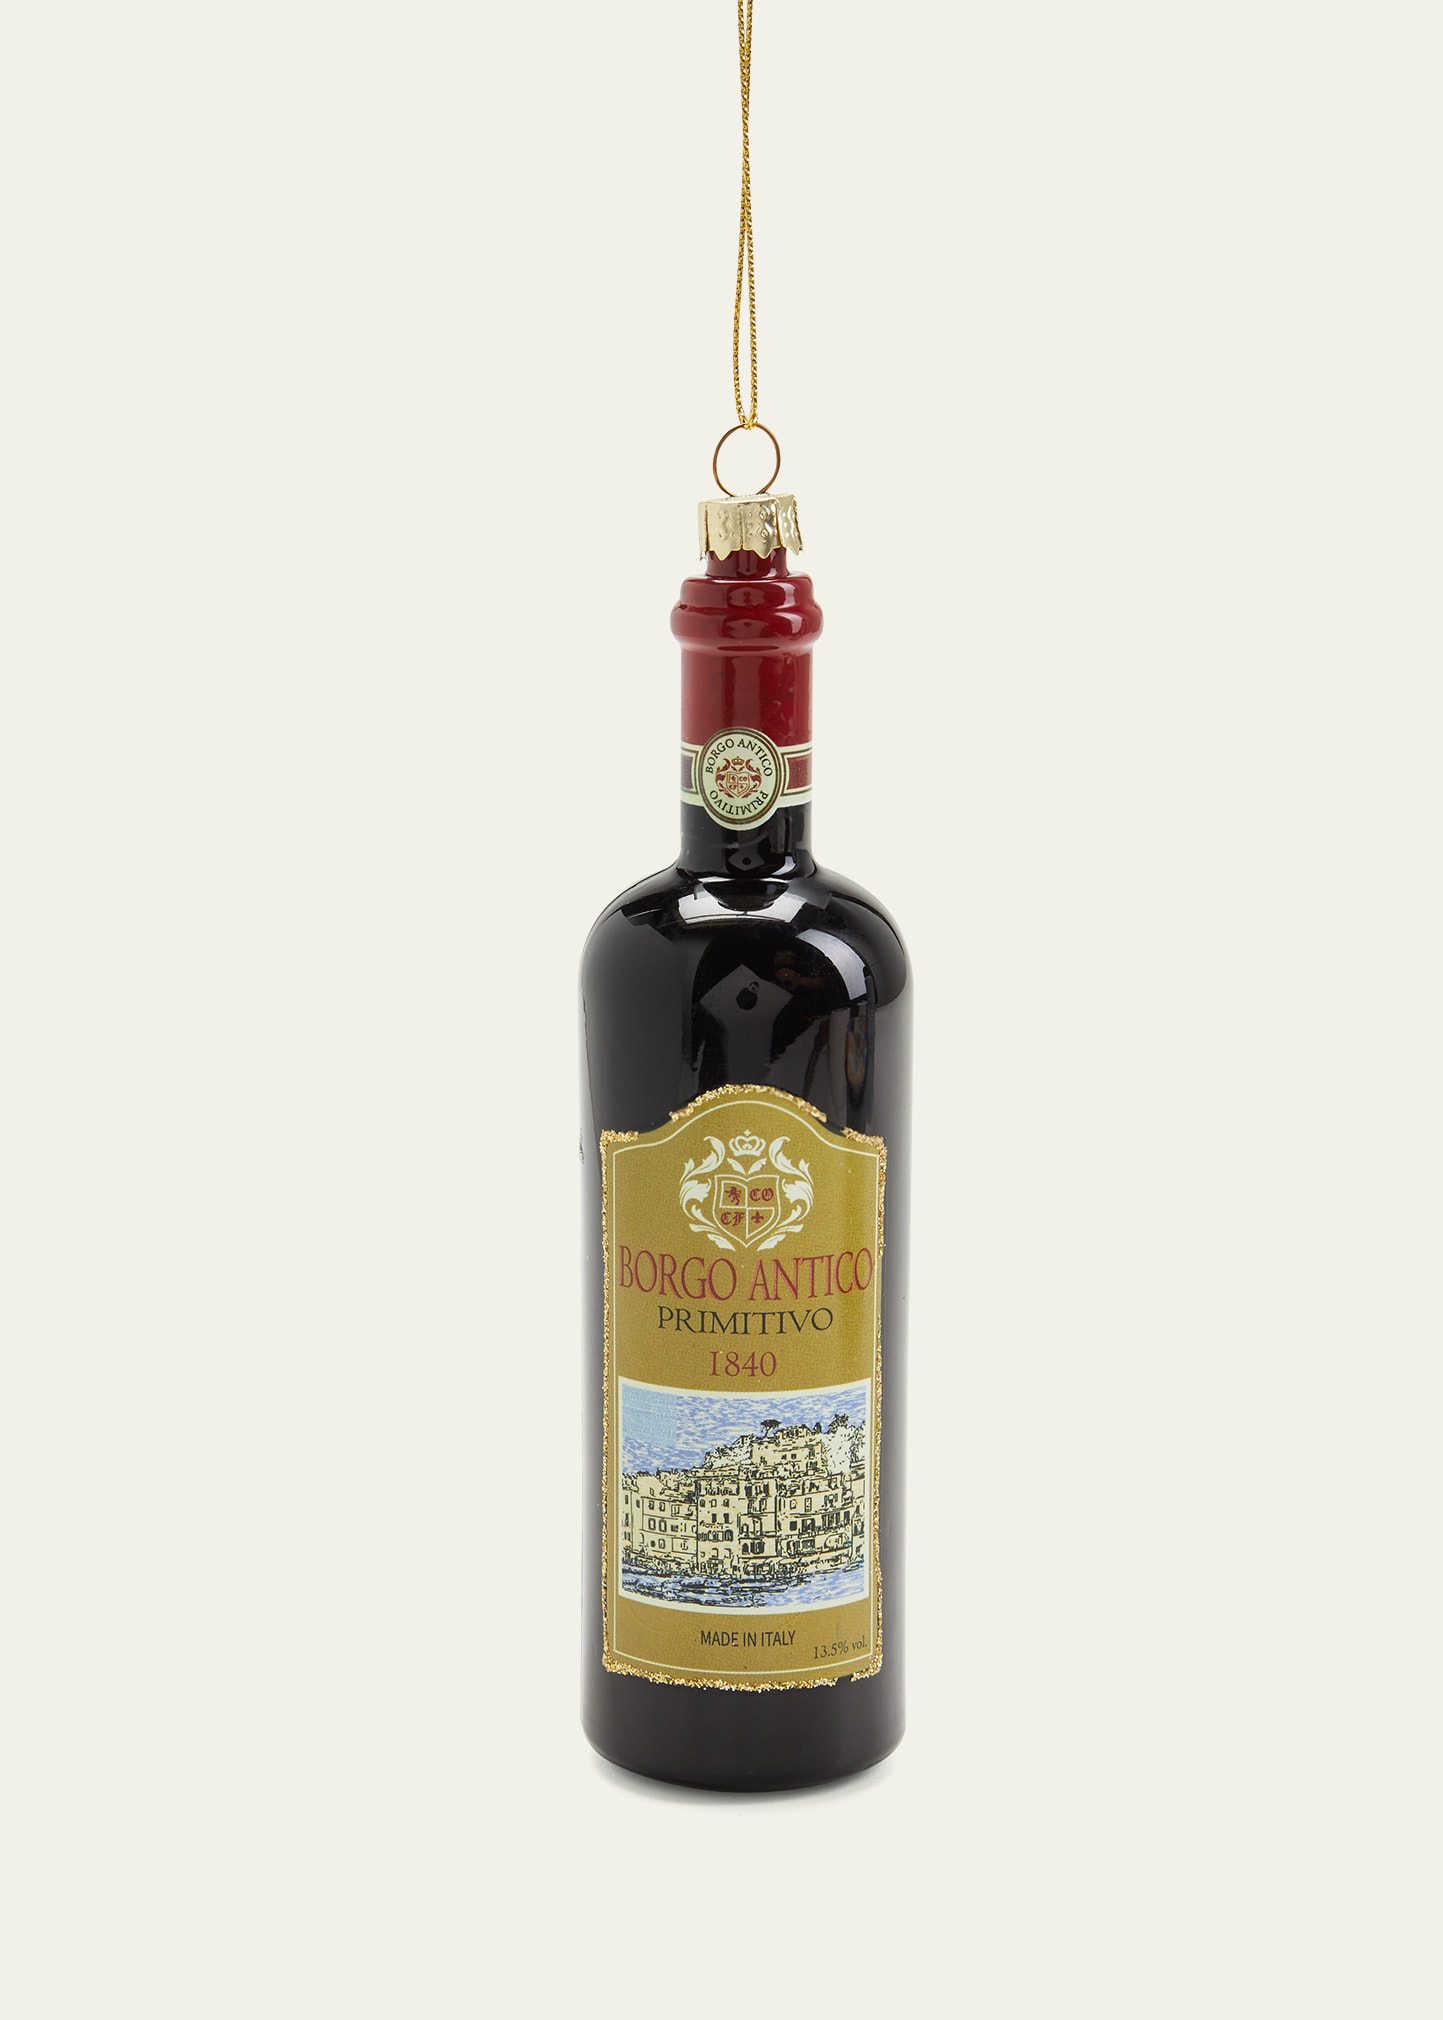 Cody Foster & Co Tall Bottle Of Borgo Antico Wine Holiday Ornament In Assorted